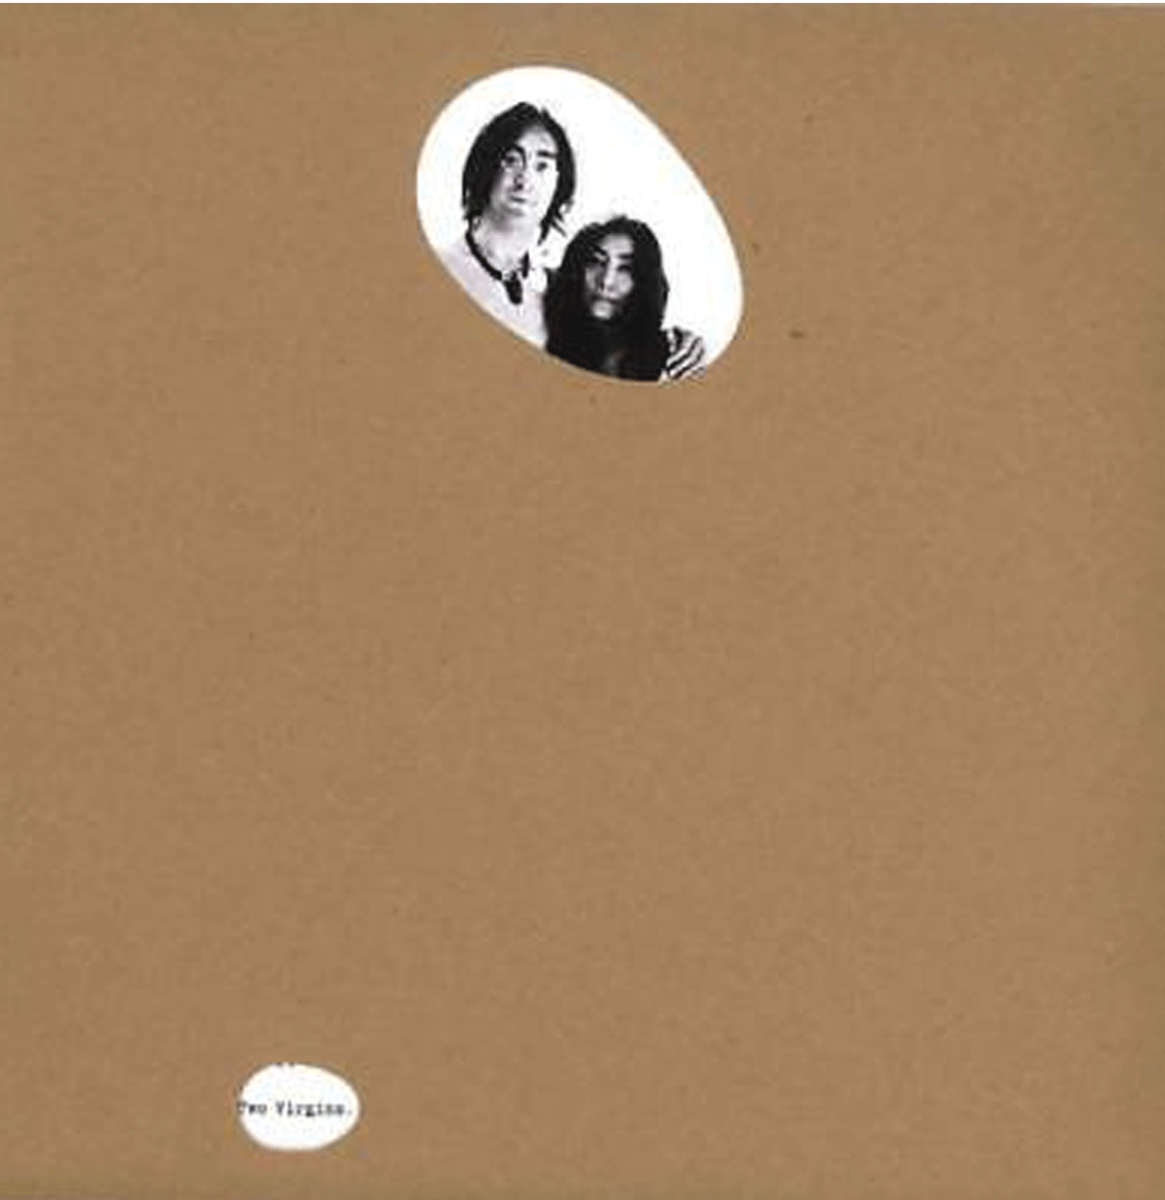 John Lennon And Yoko Ono - Unfinished Music No. 1: Two Virgins LP